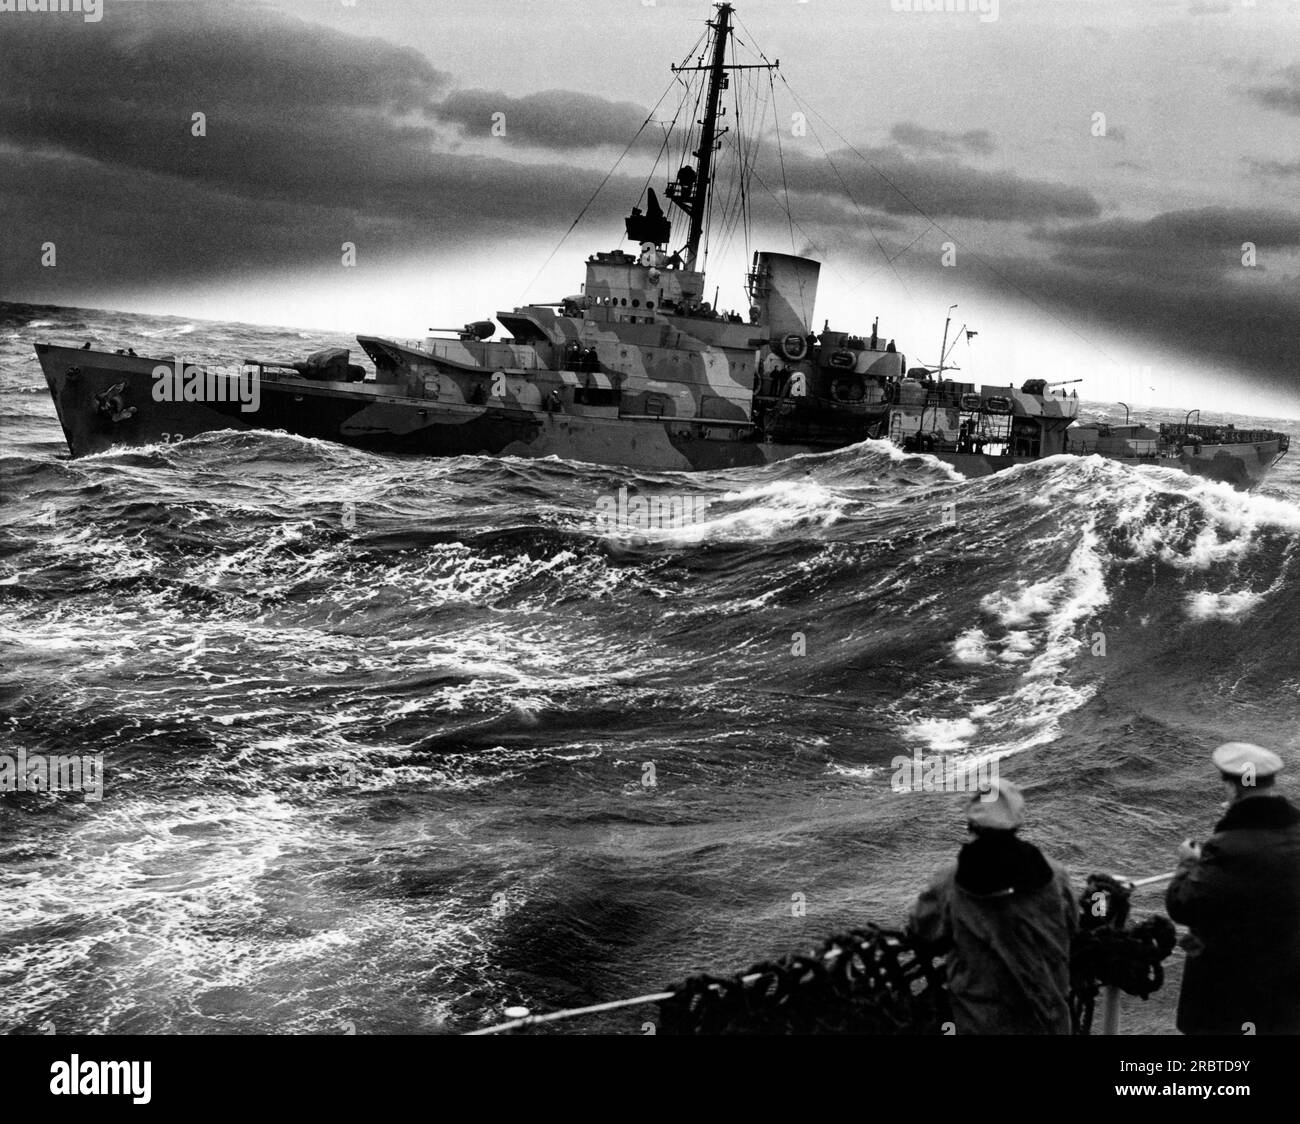 North Atlantic, circa 1944 A US Coast Guard cutter ploughs through heavy seas as it searches for Nazi submarines preying on convoys to the European war zones. Stock Photo